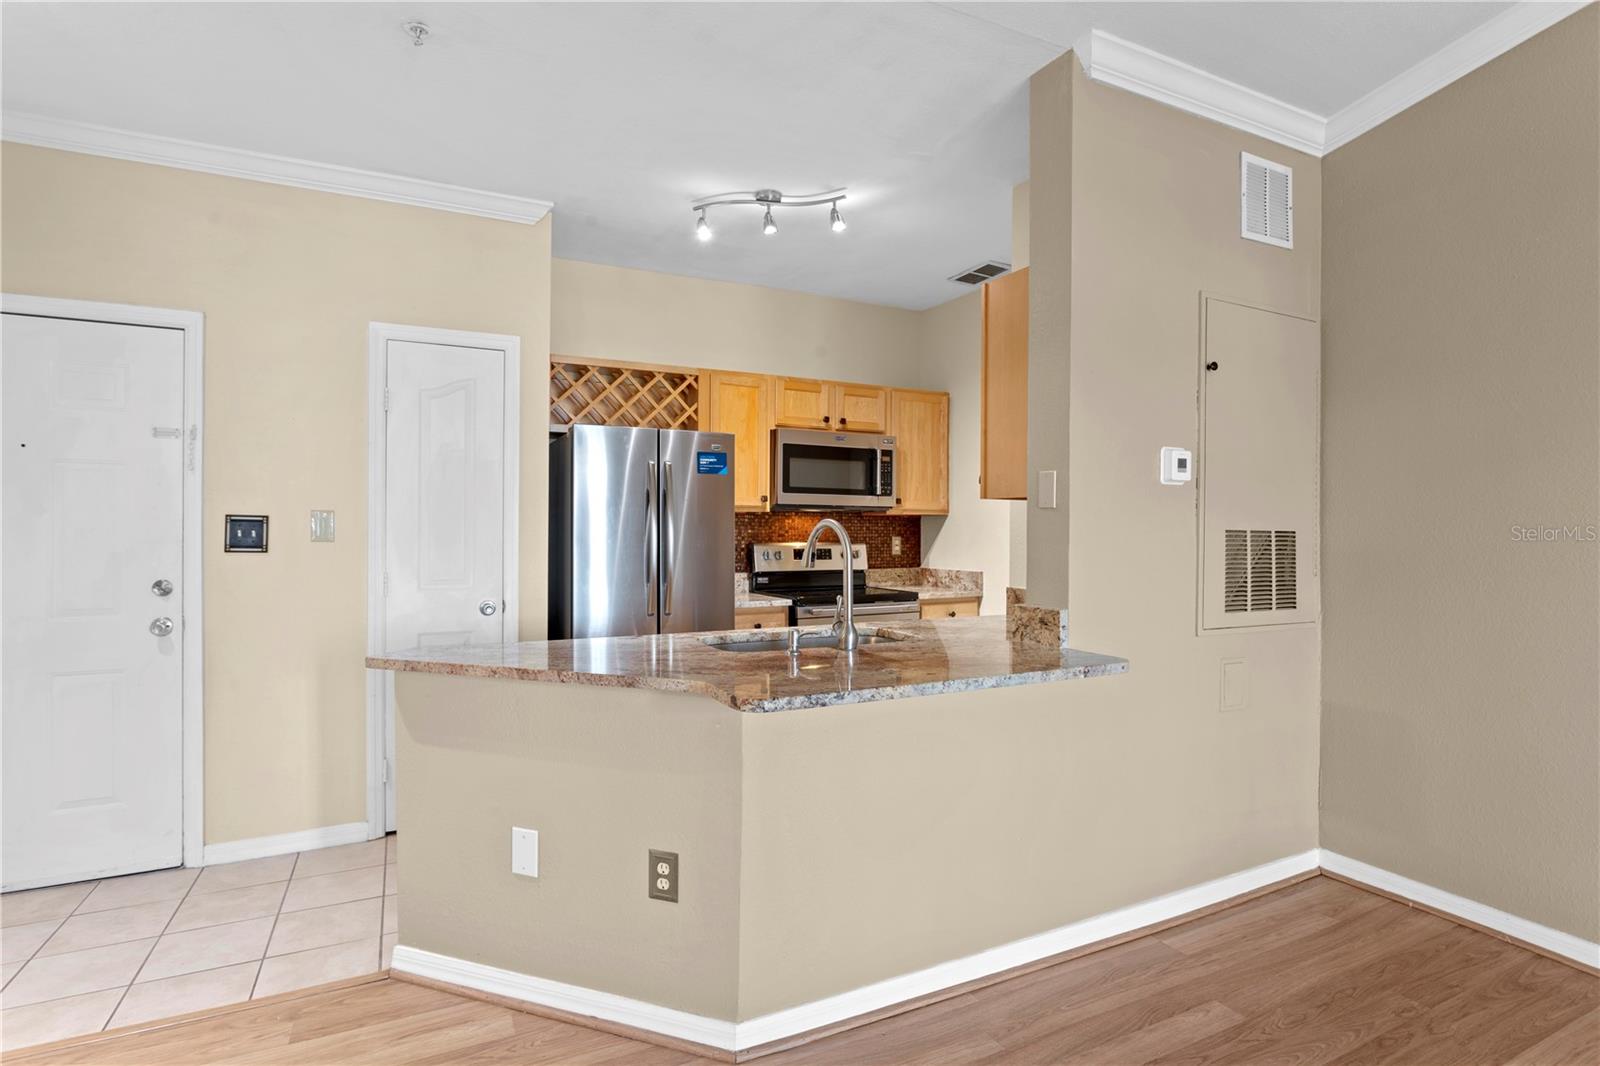 The kitchen opens to the large family room.